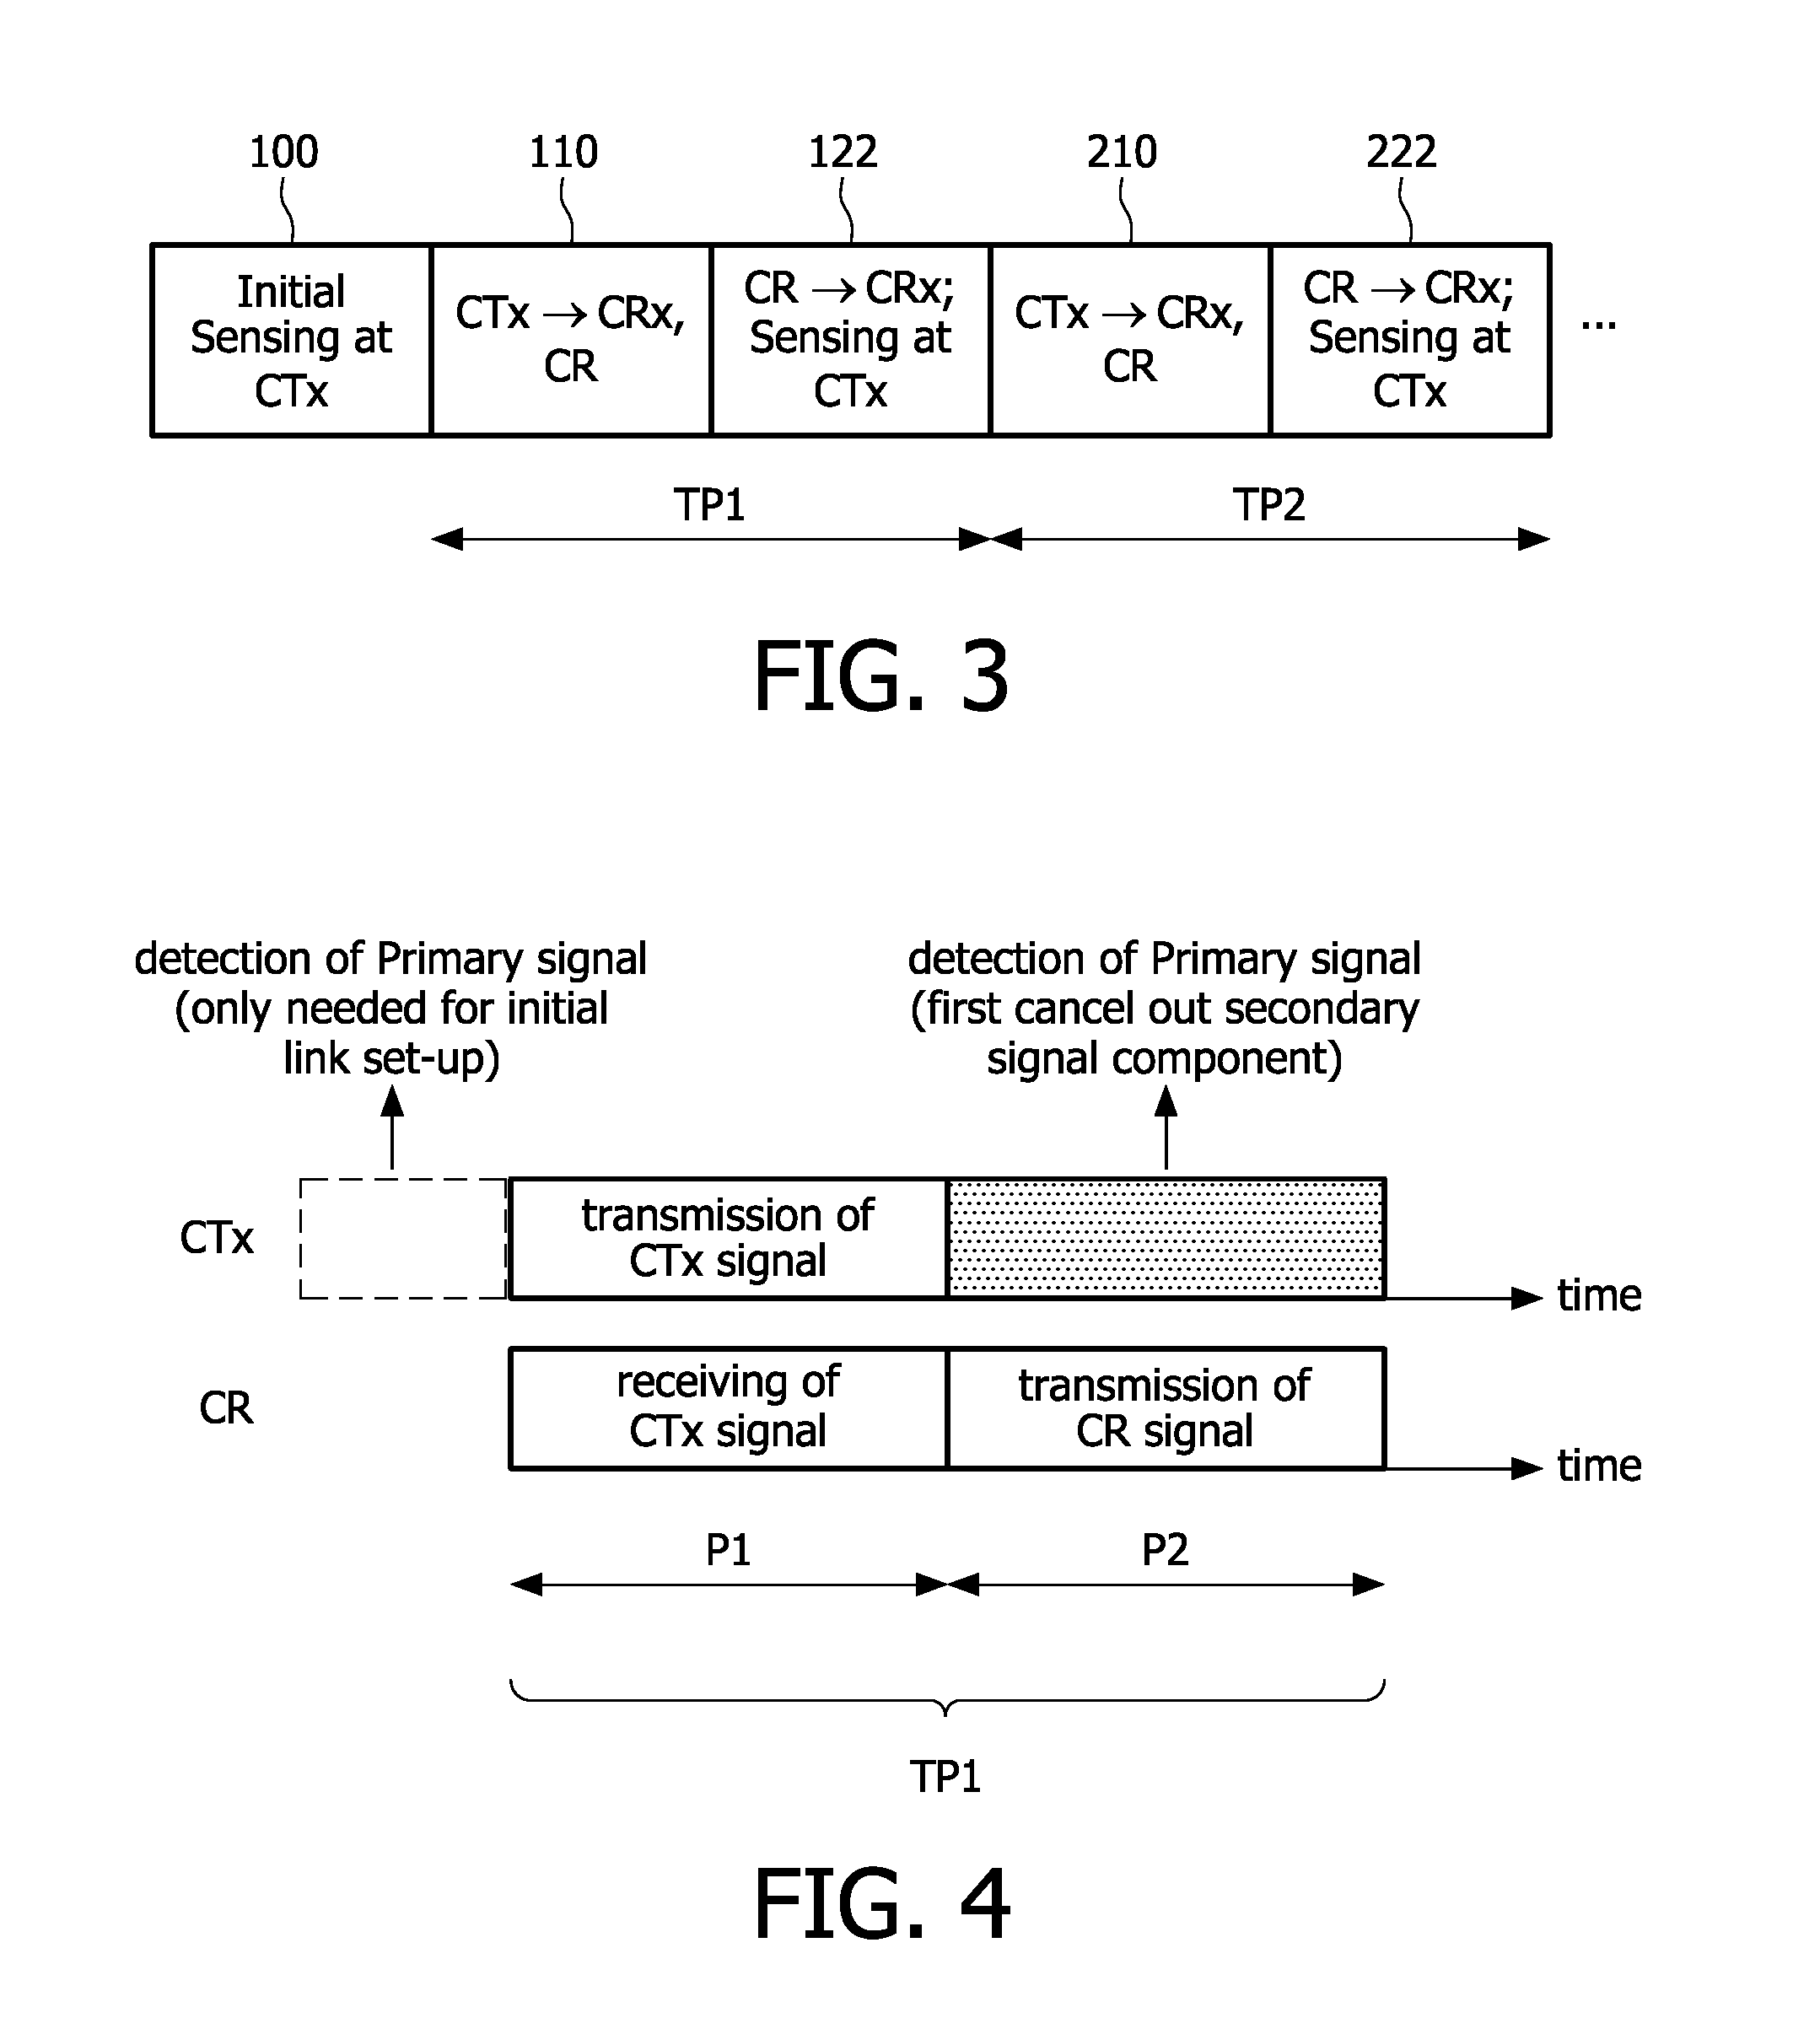 Sensing and communication protocols for shared spectrum usage in a radio cognitive relay system